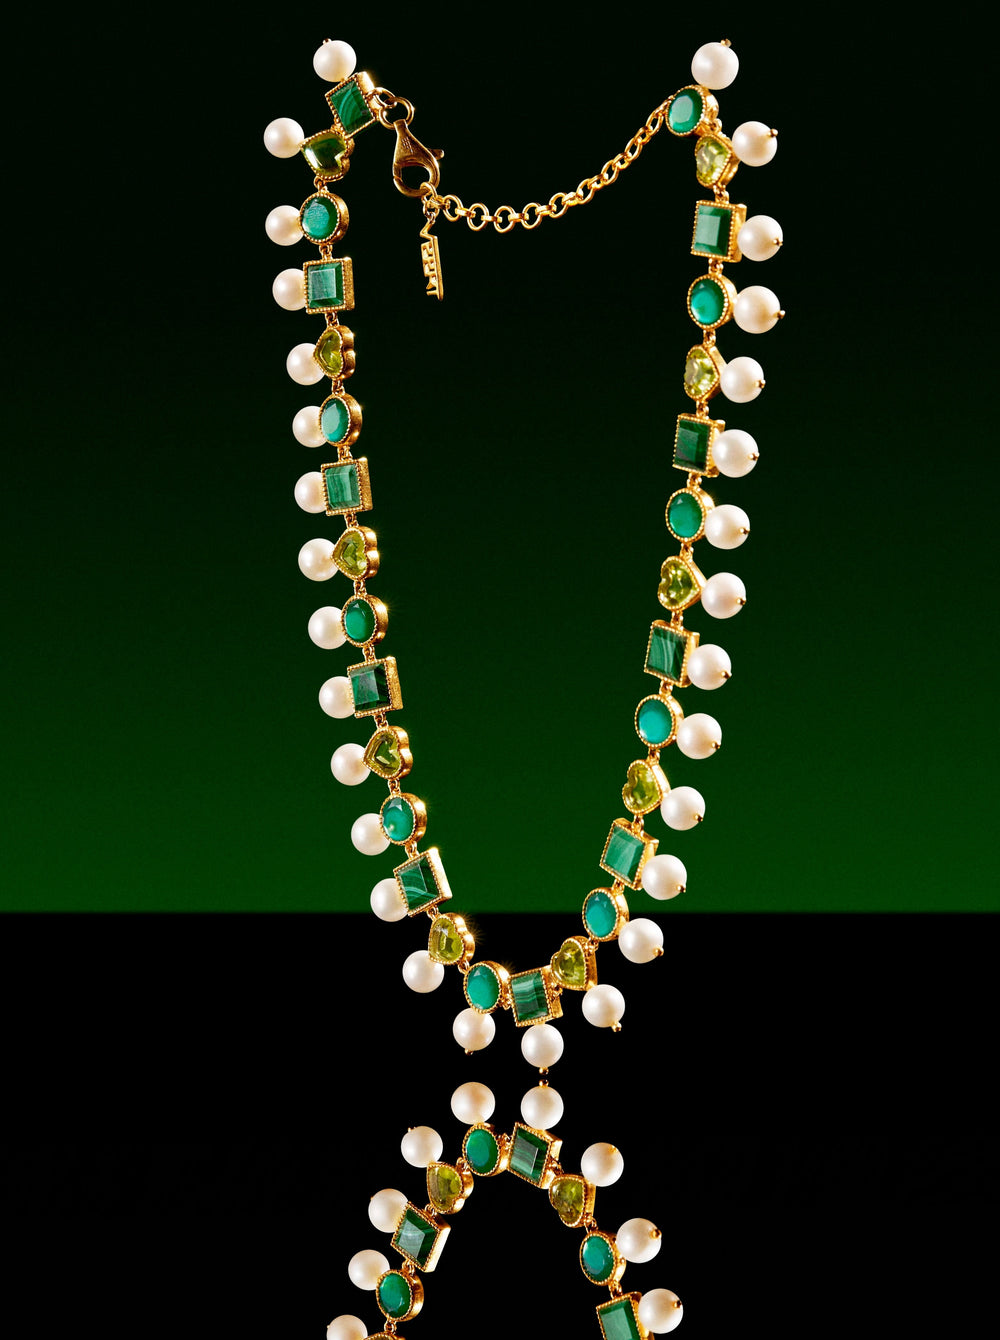 Green Pearl Shape Necklace in Yellow Gold